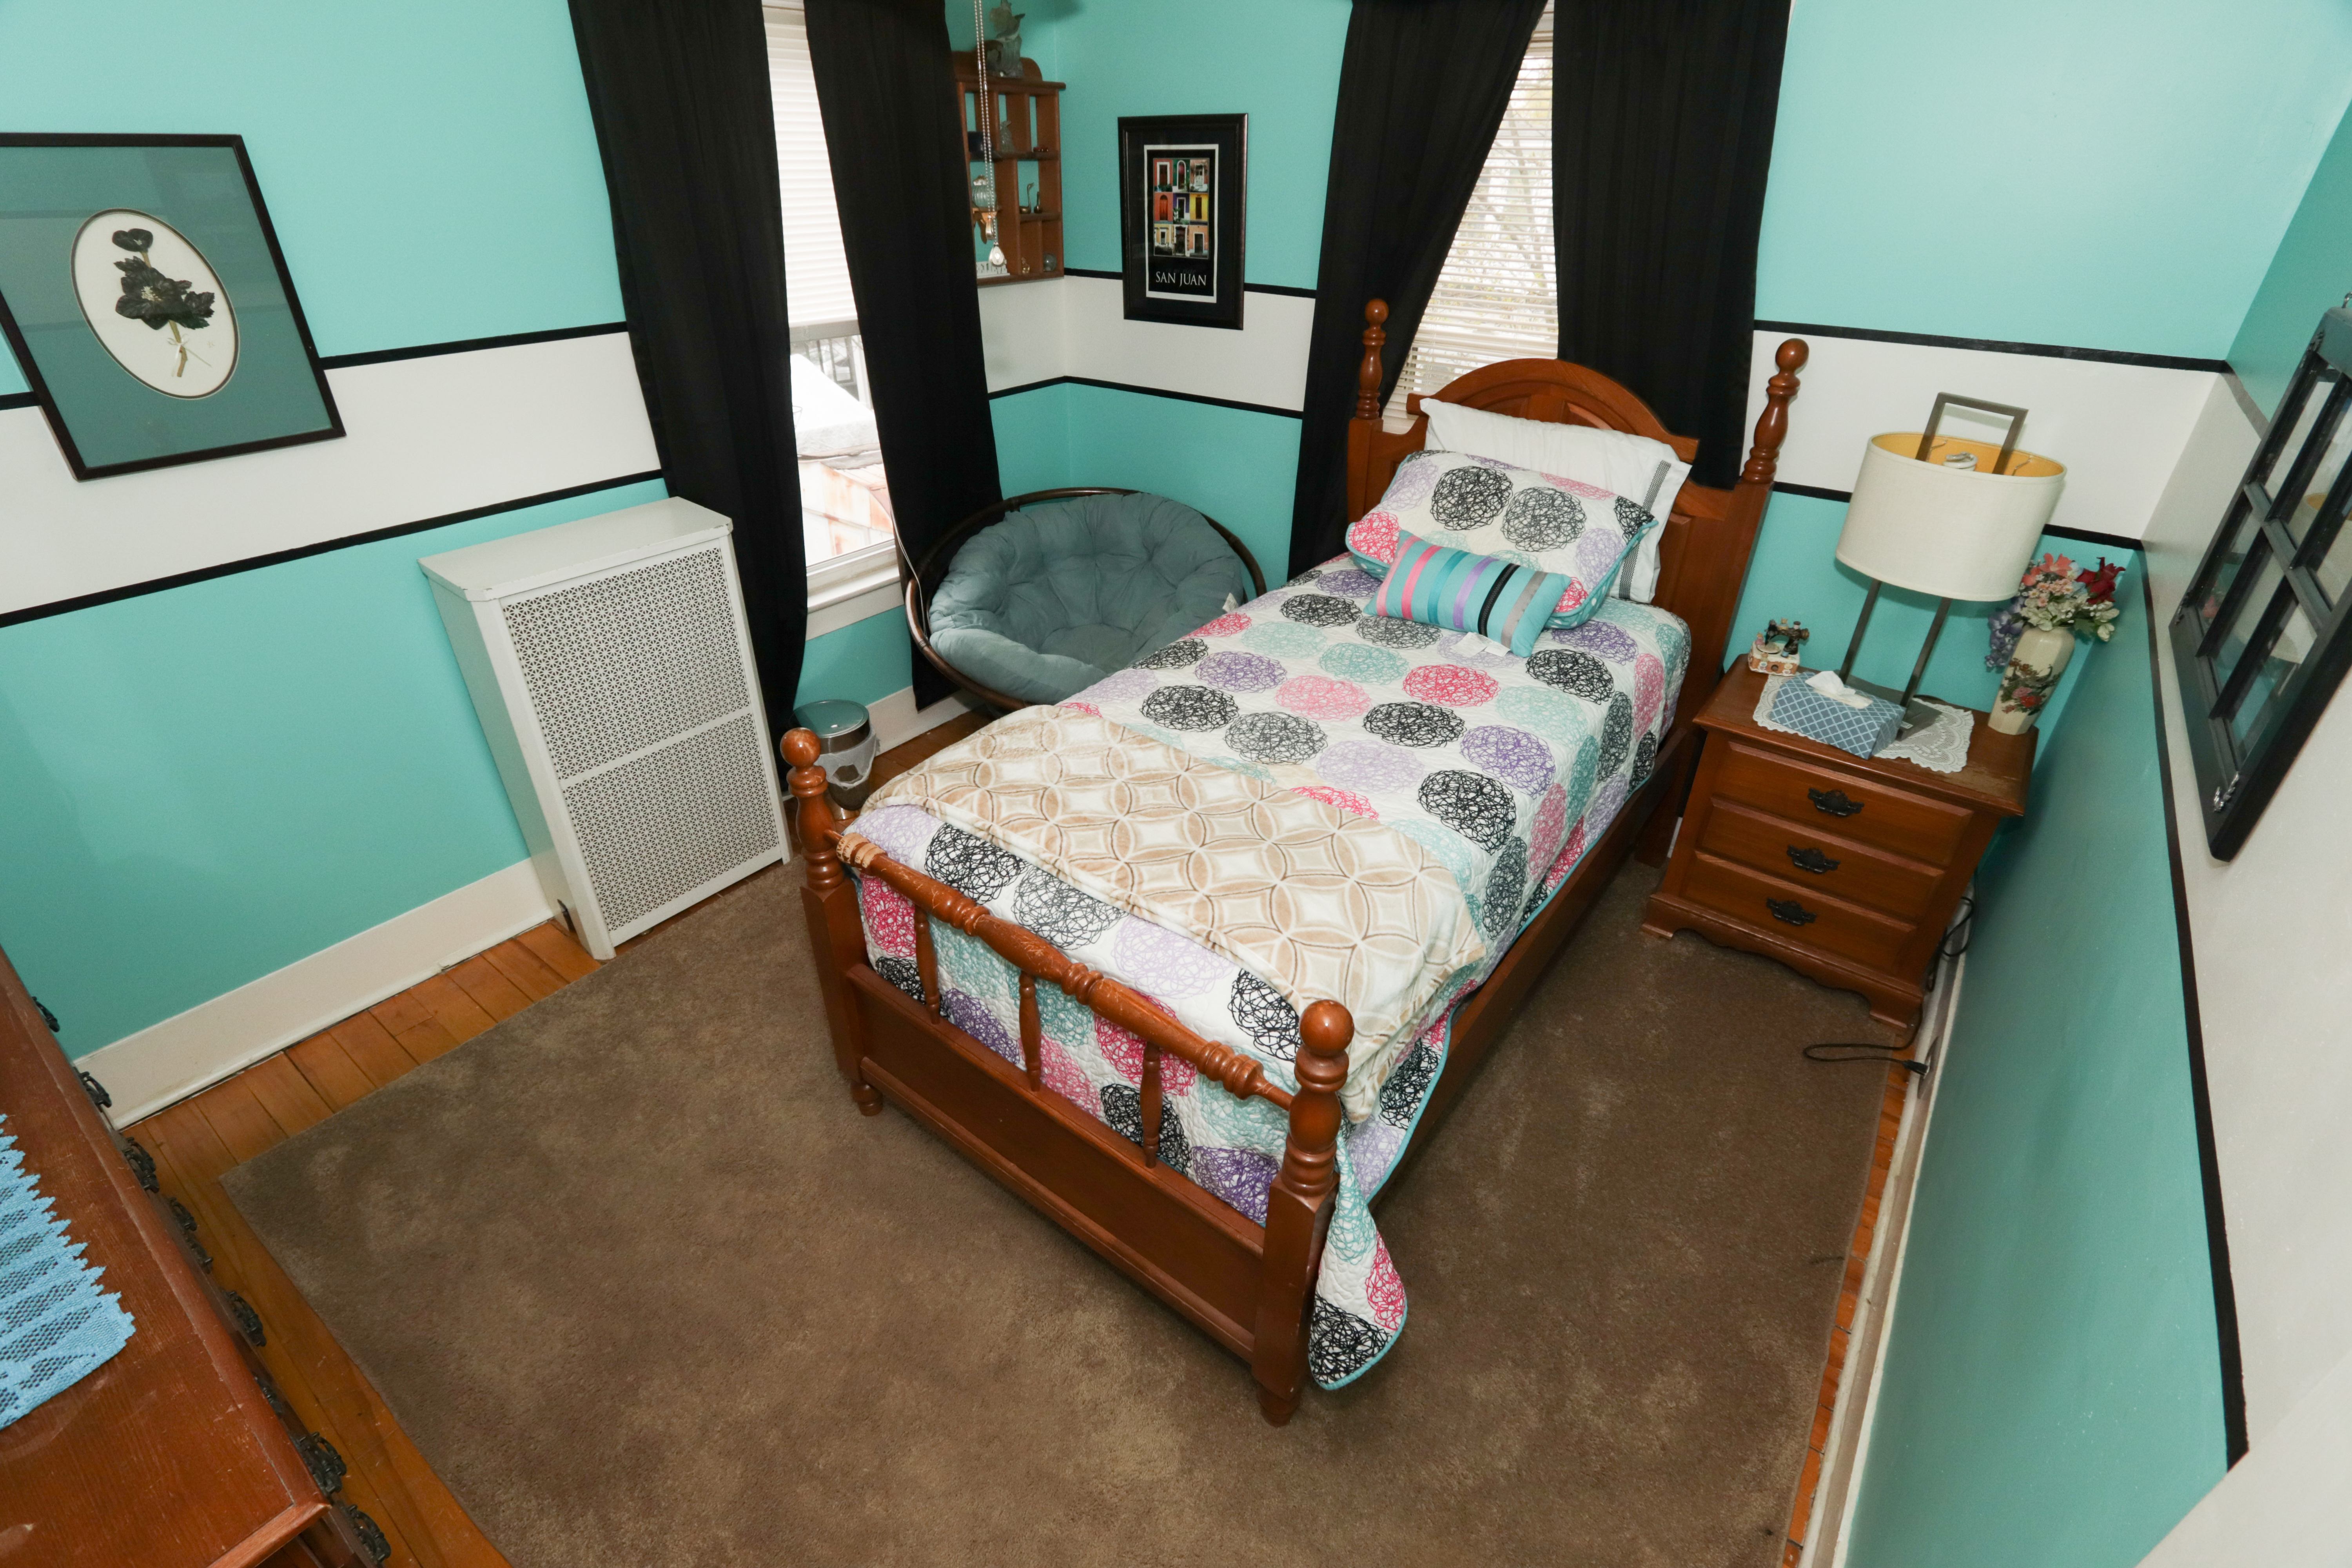 South Nashua House for Sale 34.5 Russell Ave Nashua NH 03060 bedroom4